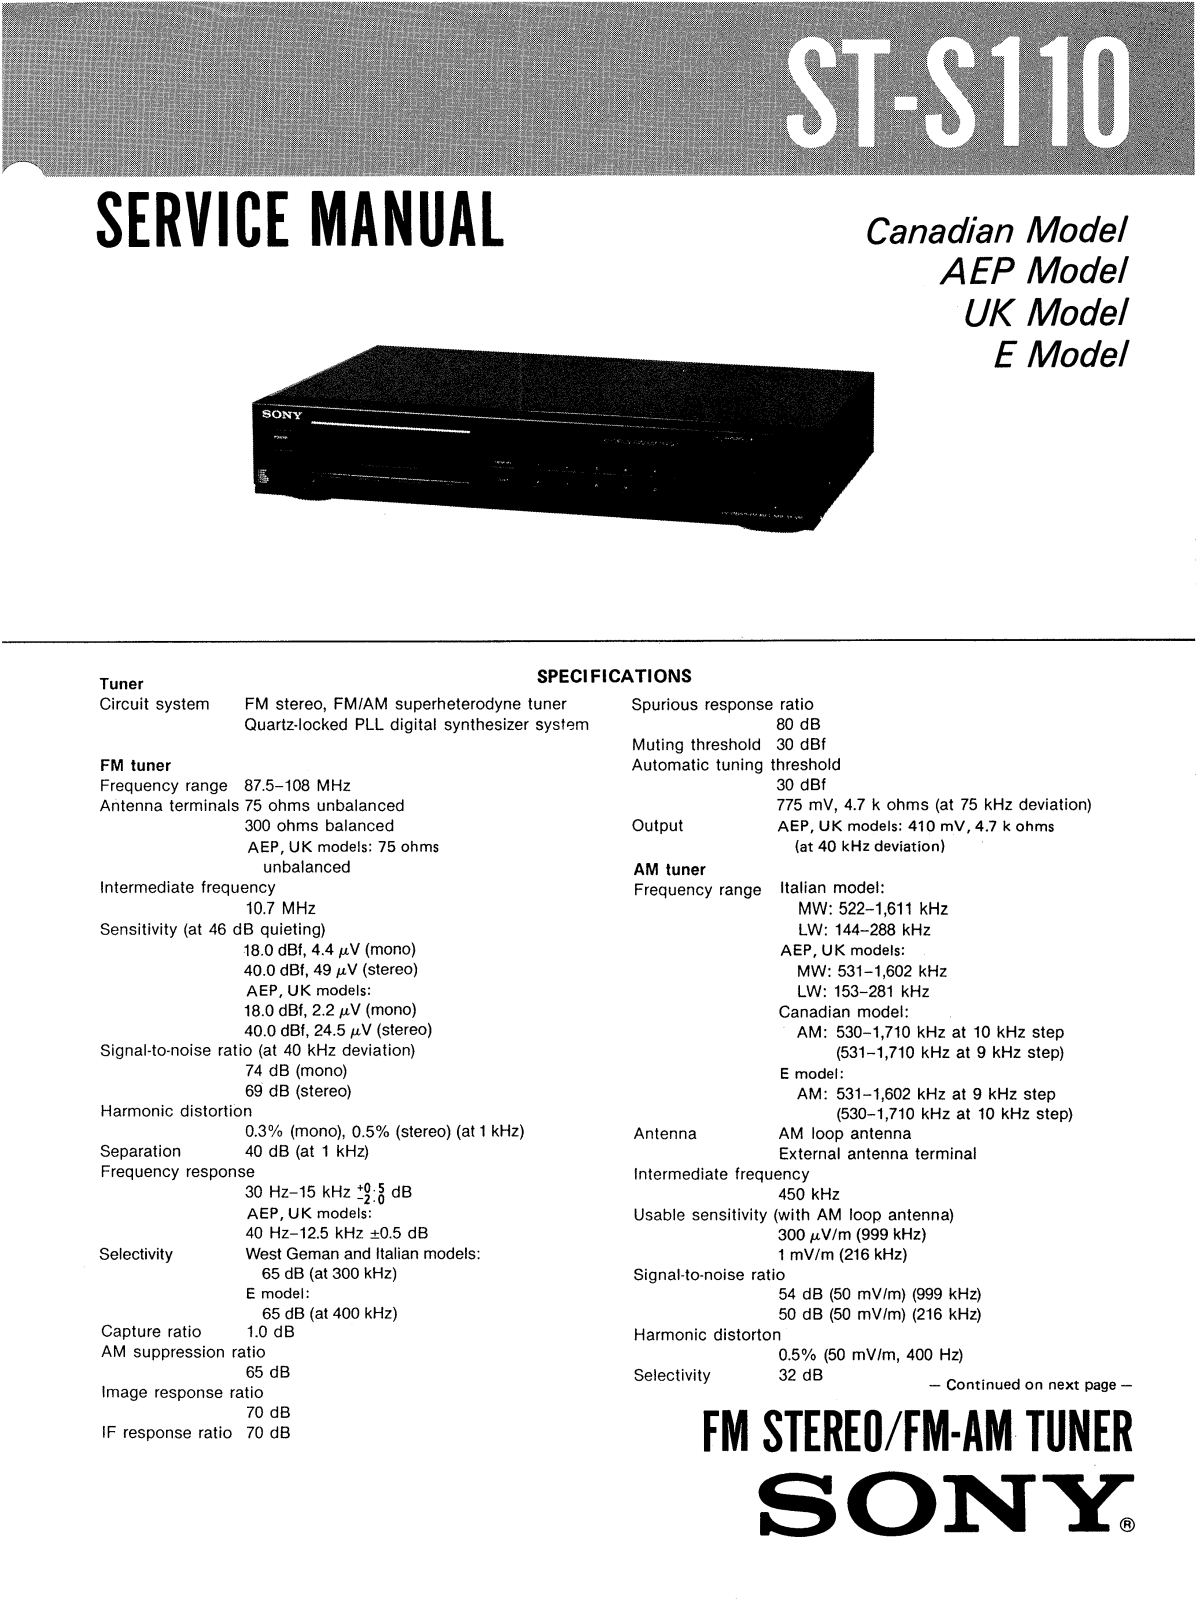 Sony STS-110 Service manual